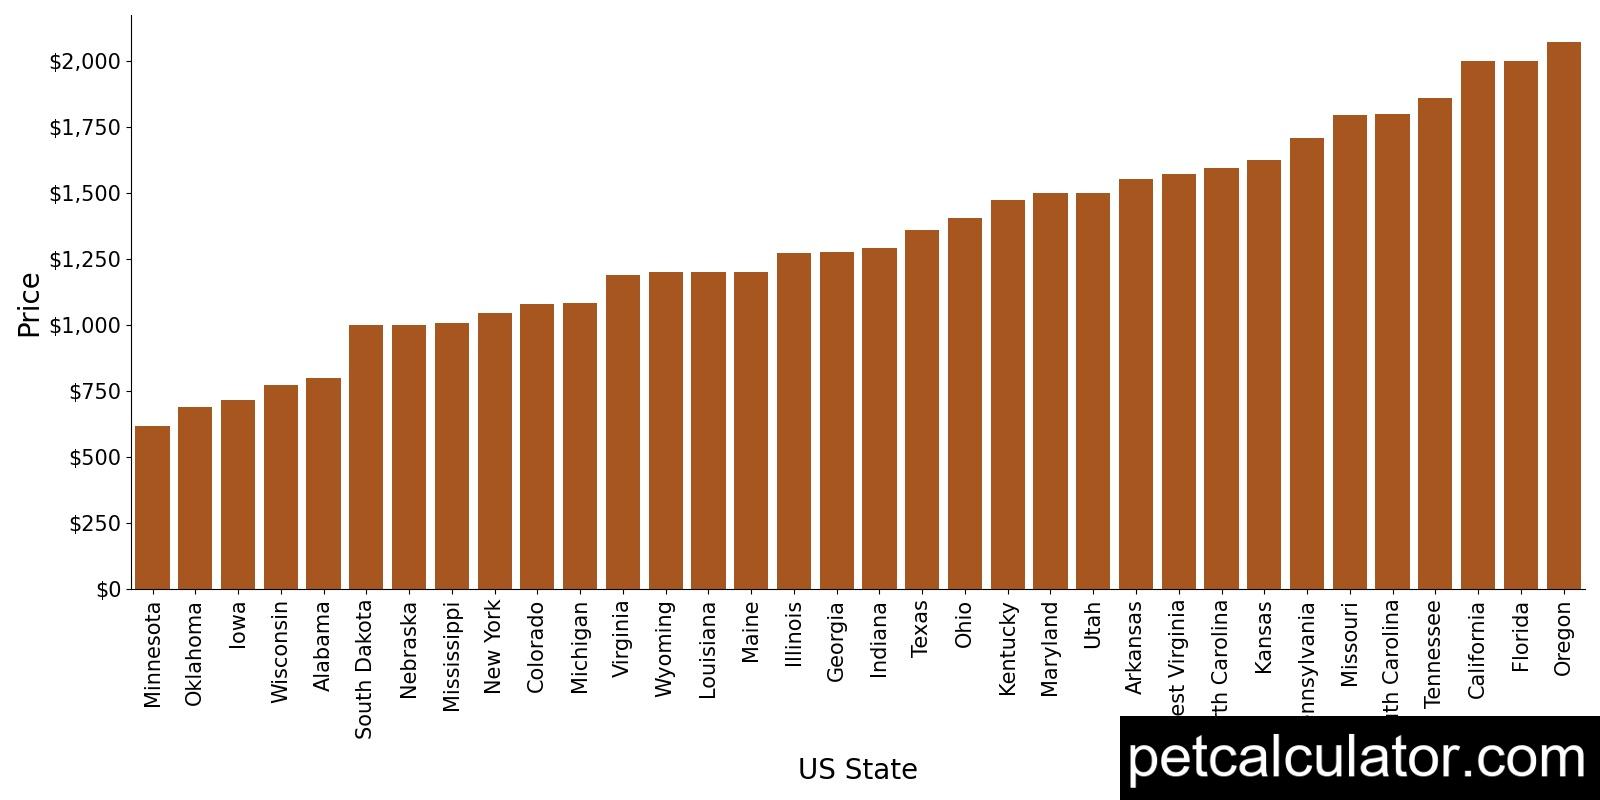 Price of Shetland Sheepdog by US State 